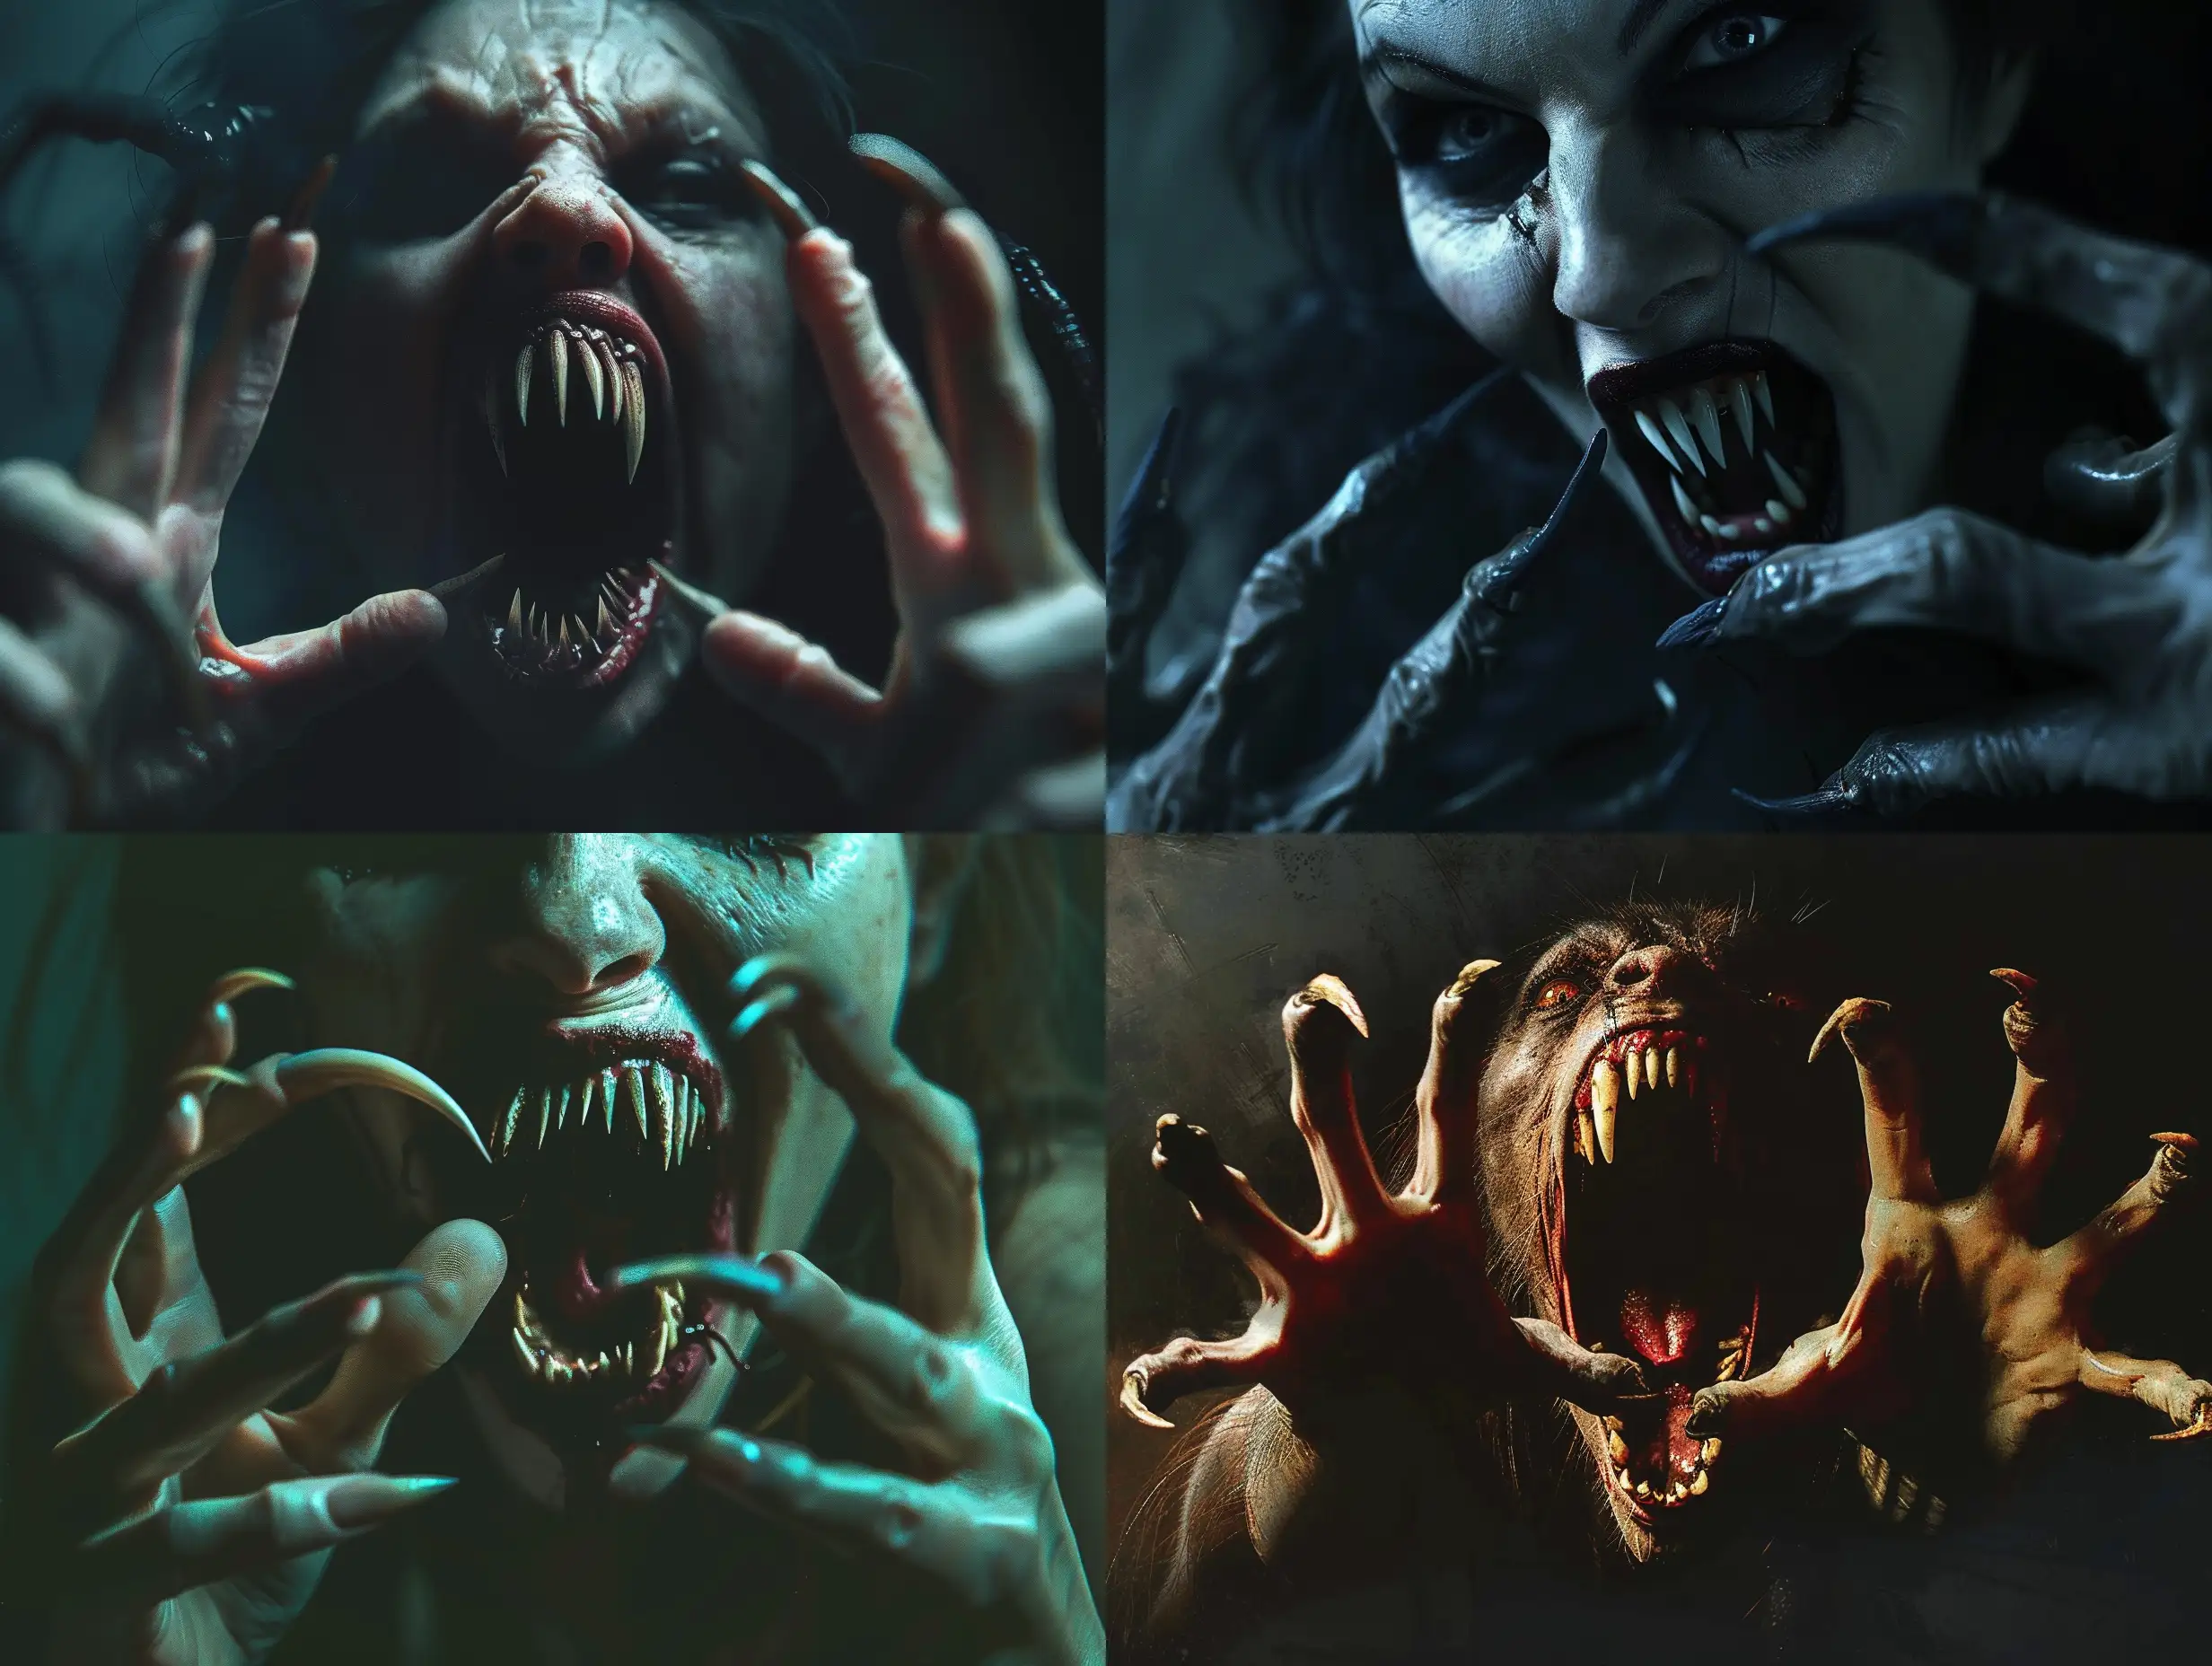 A photorealistic scene of a wild vampire woman emerging from the darkness, her menacing mouth open to reveal terrifying fangs. Her long, pointed fingernails resemble the claws of a predator, adding to the eerie and haunting atmosphere. The vampire's appearance is grotesque, with every detail meticulously textured and detailed, from the anatomical accuracy of her hands with five fingers to the hyper-realistic rendering of her undead features. The cinematic quality of the scene intensifies the horror, creating a nightmare-inducing image that is both aggressive and intensely creepy. The atmospheric lighting adds to the overall sense of terror, making this an incredibly detailed and realistic portrayal of a monstrous vampire